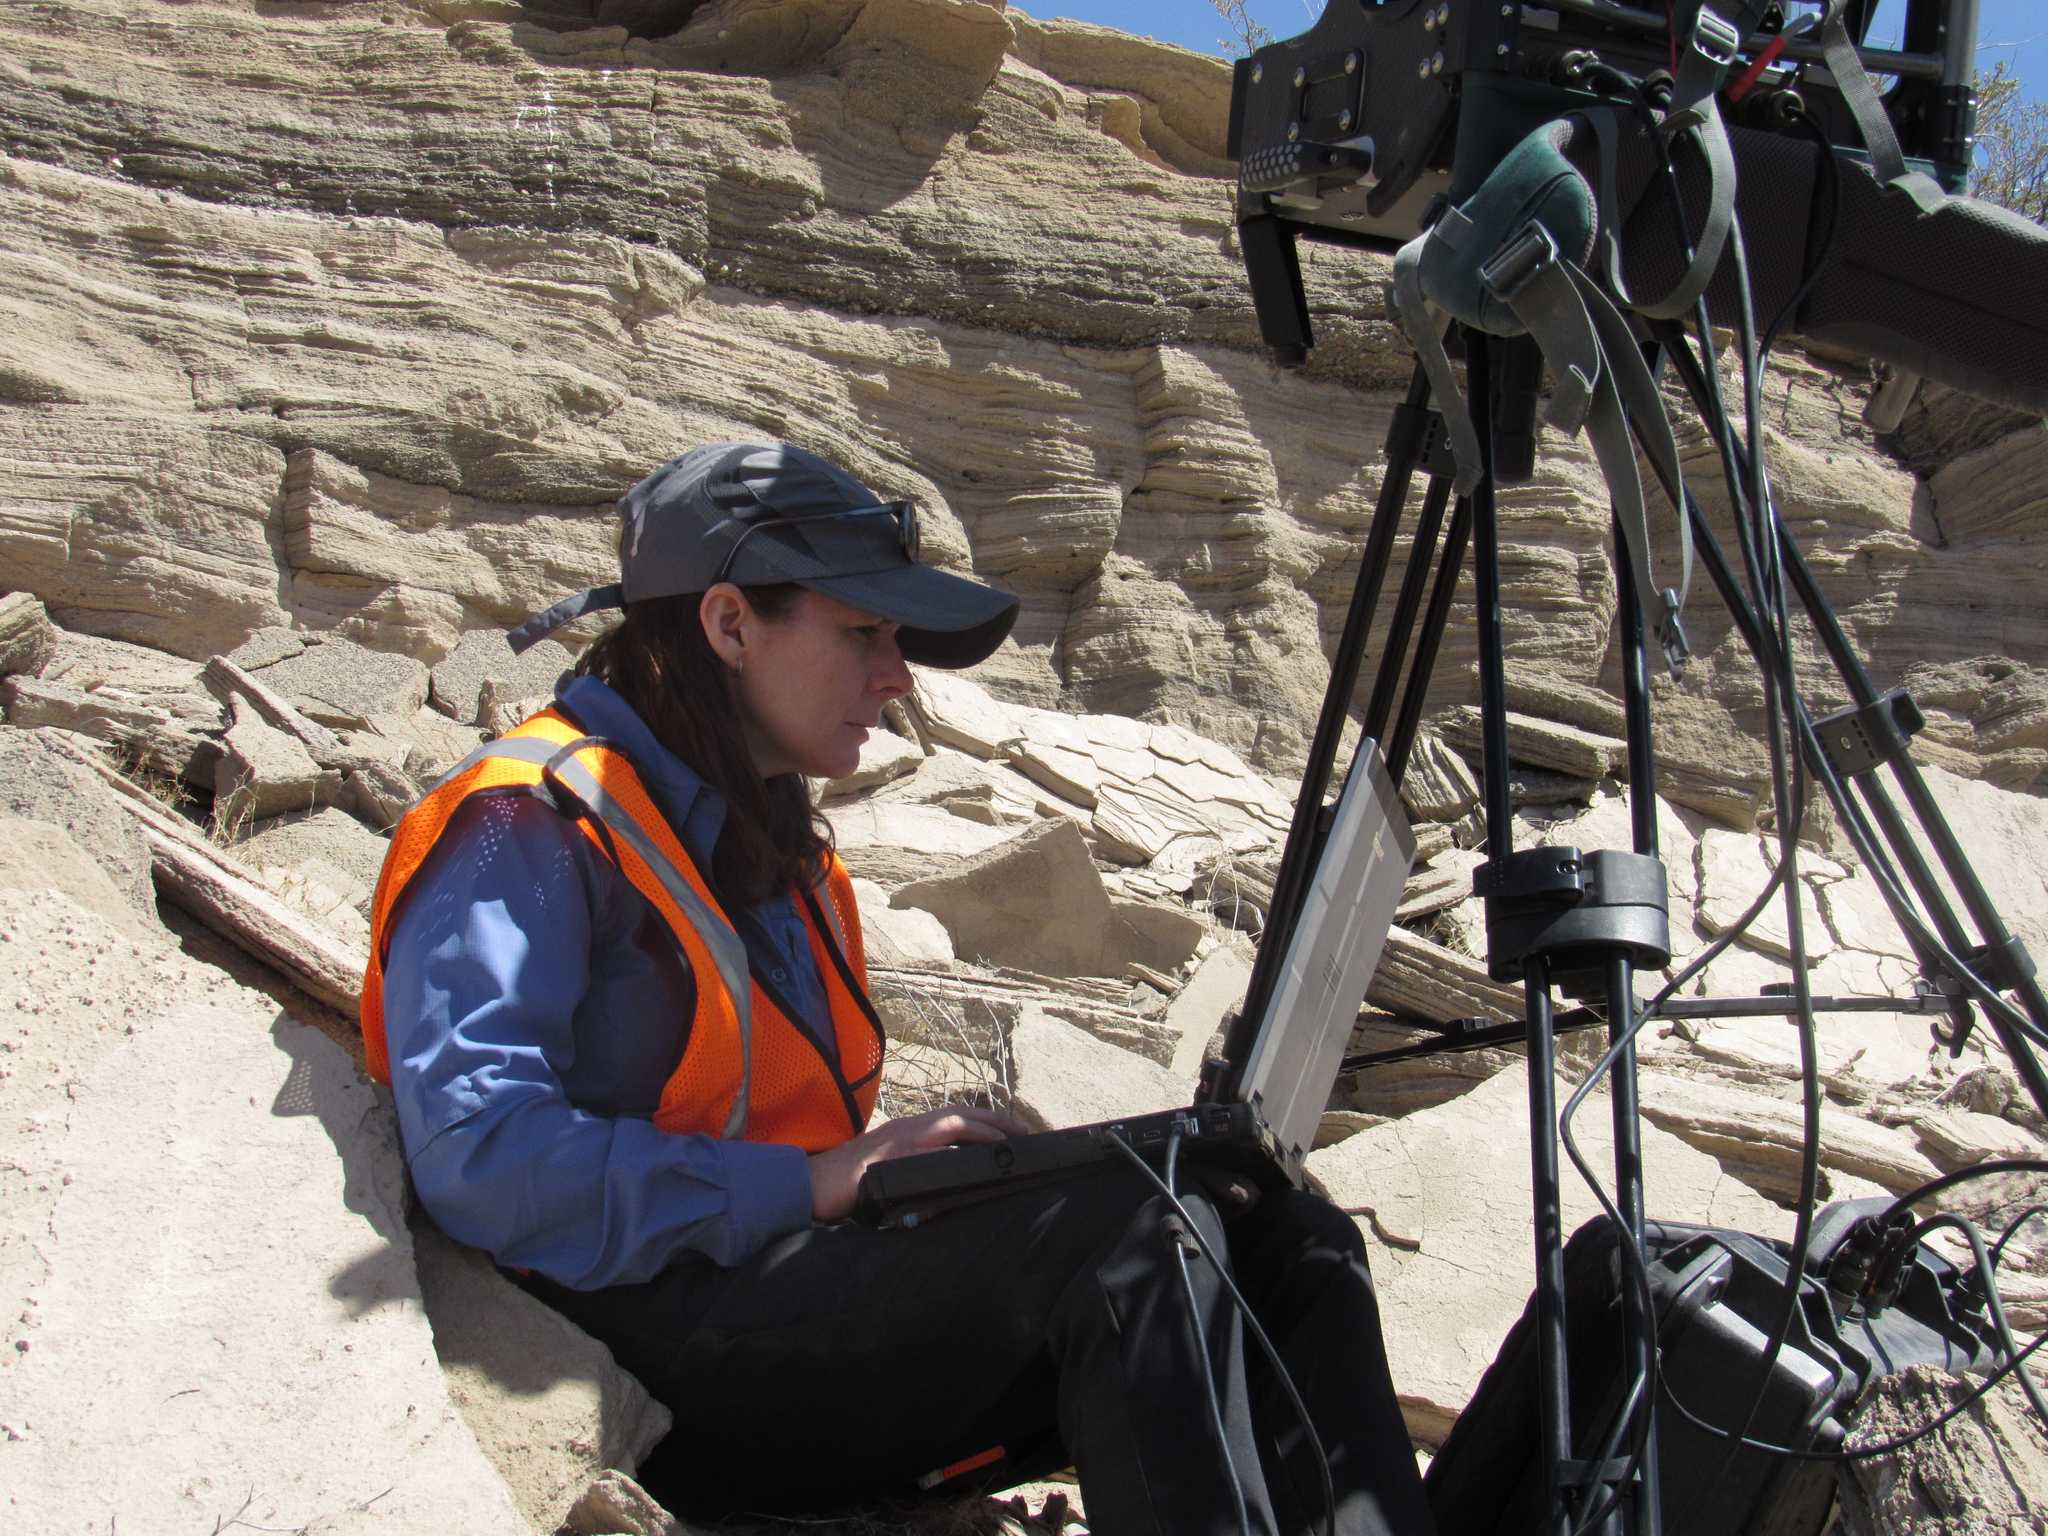 Rogers at work with a hyperspectral imager at Potrillo Volcanic Field in New Mexico, April 2022